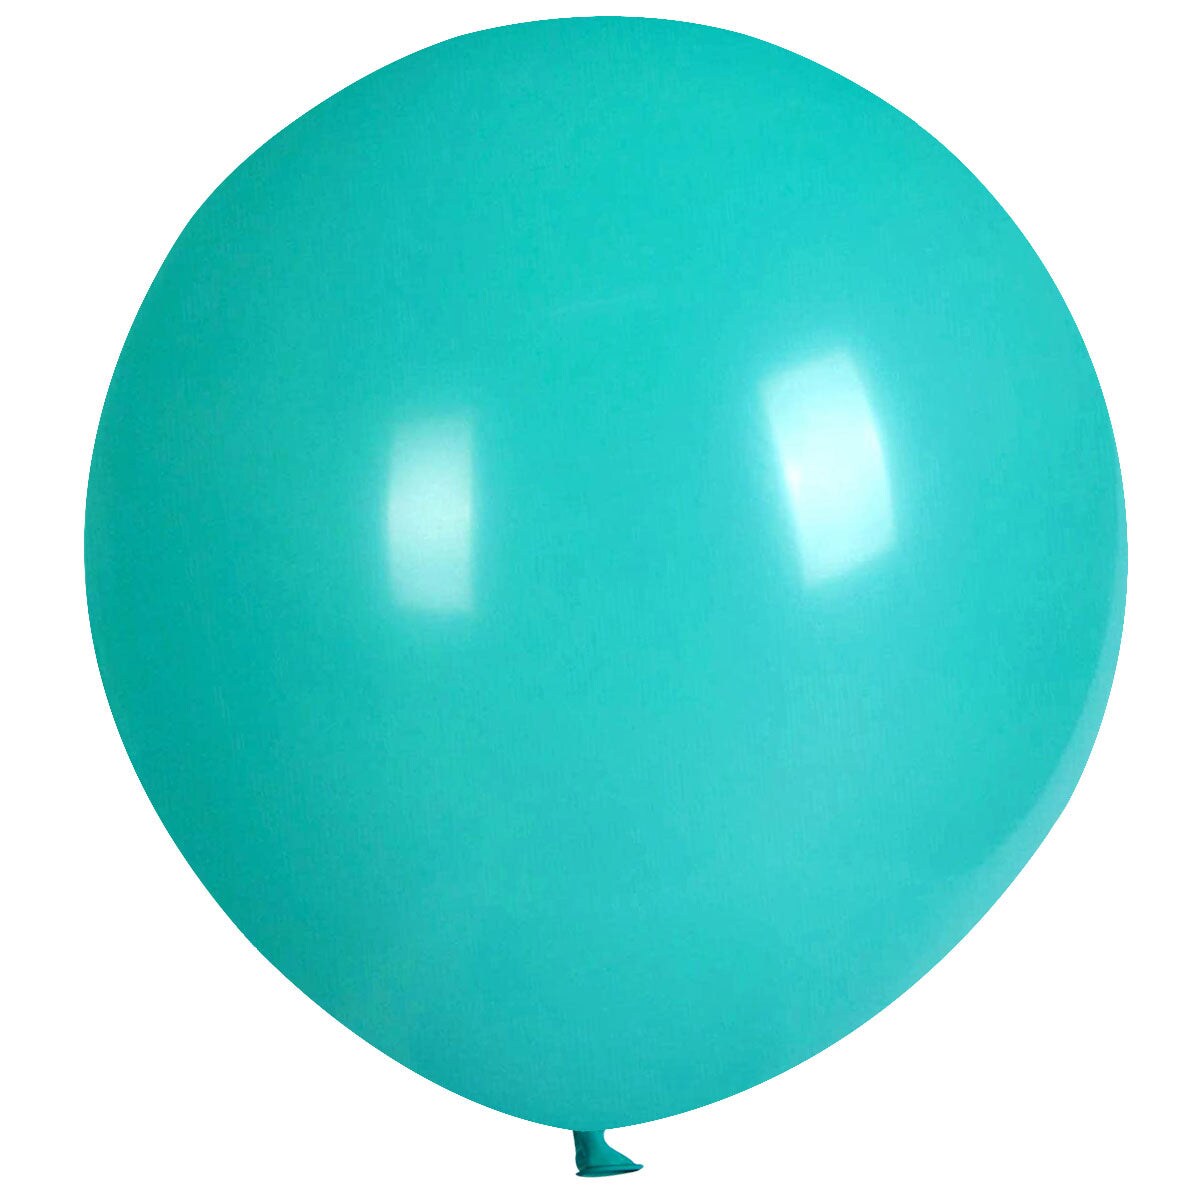 Wrapables 18 Inch Latex Balloons (10 Pack), Teal